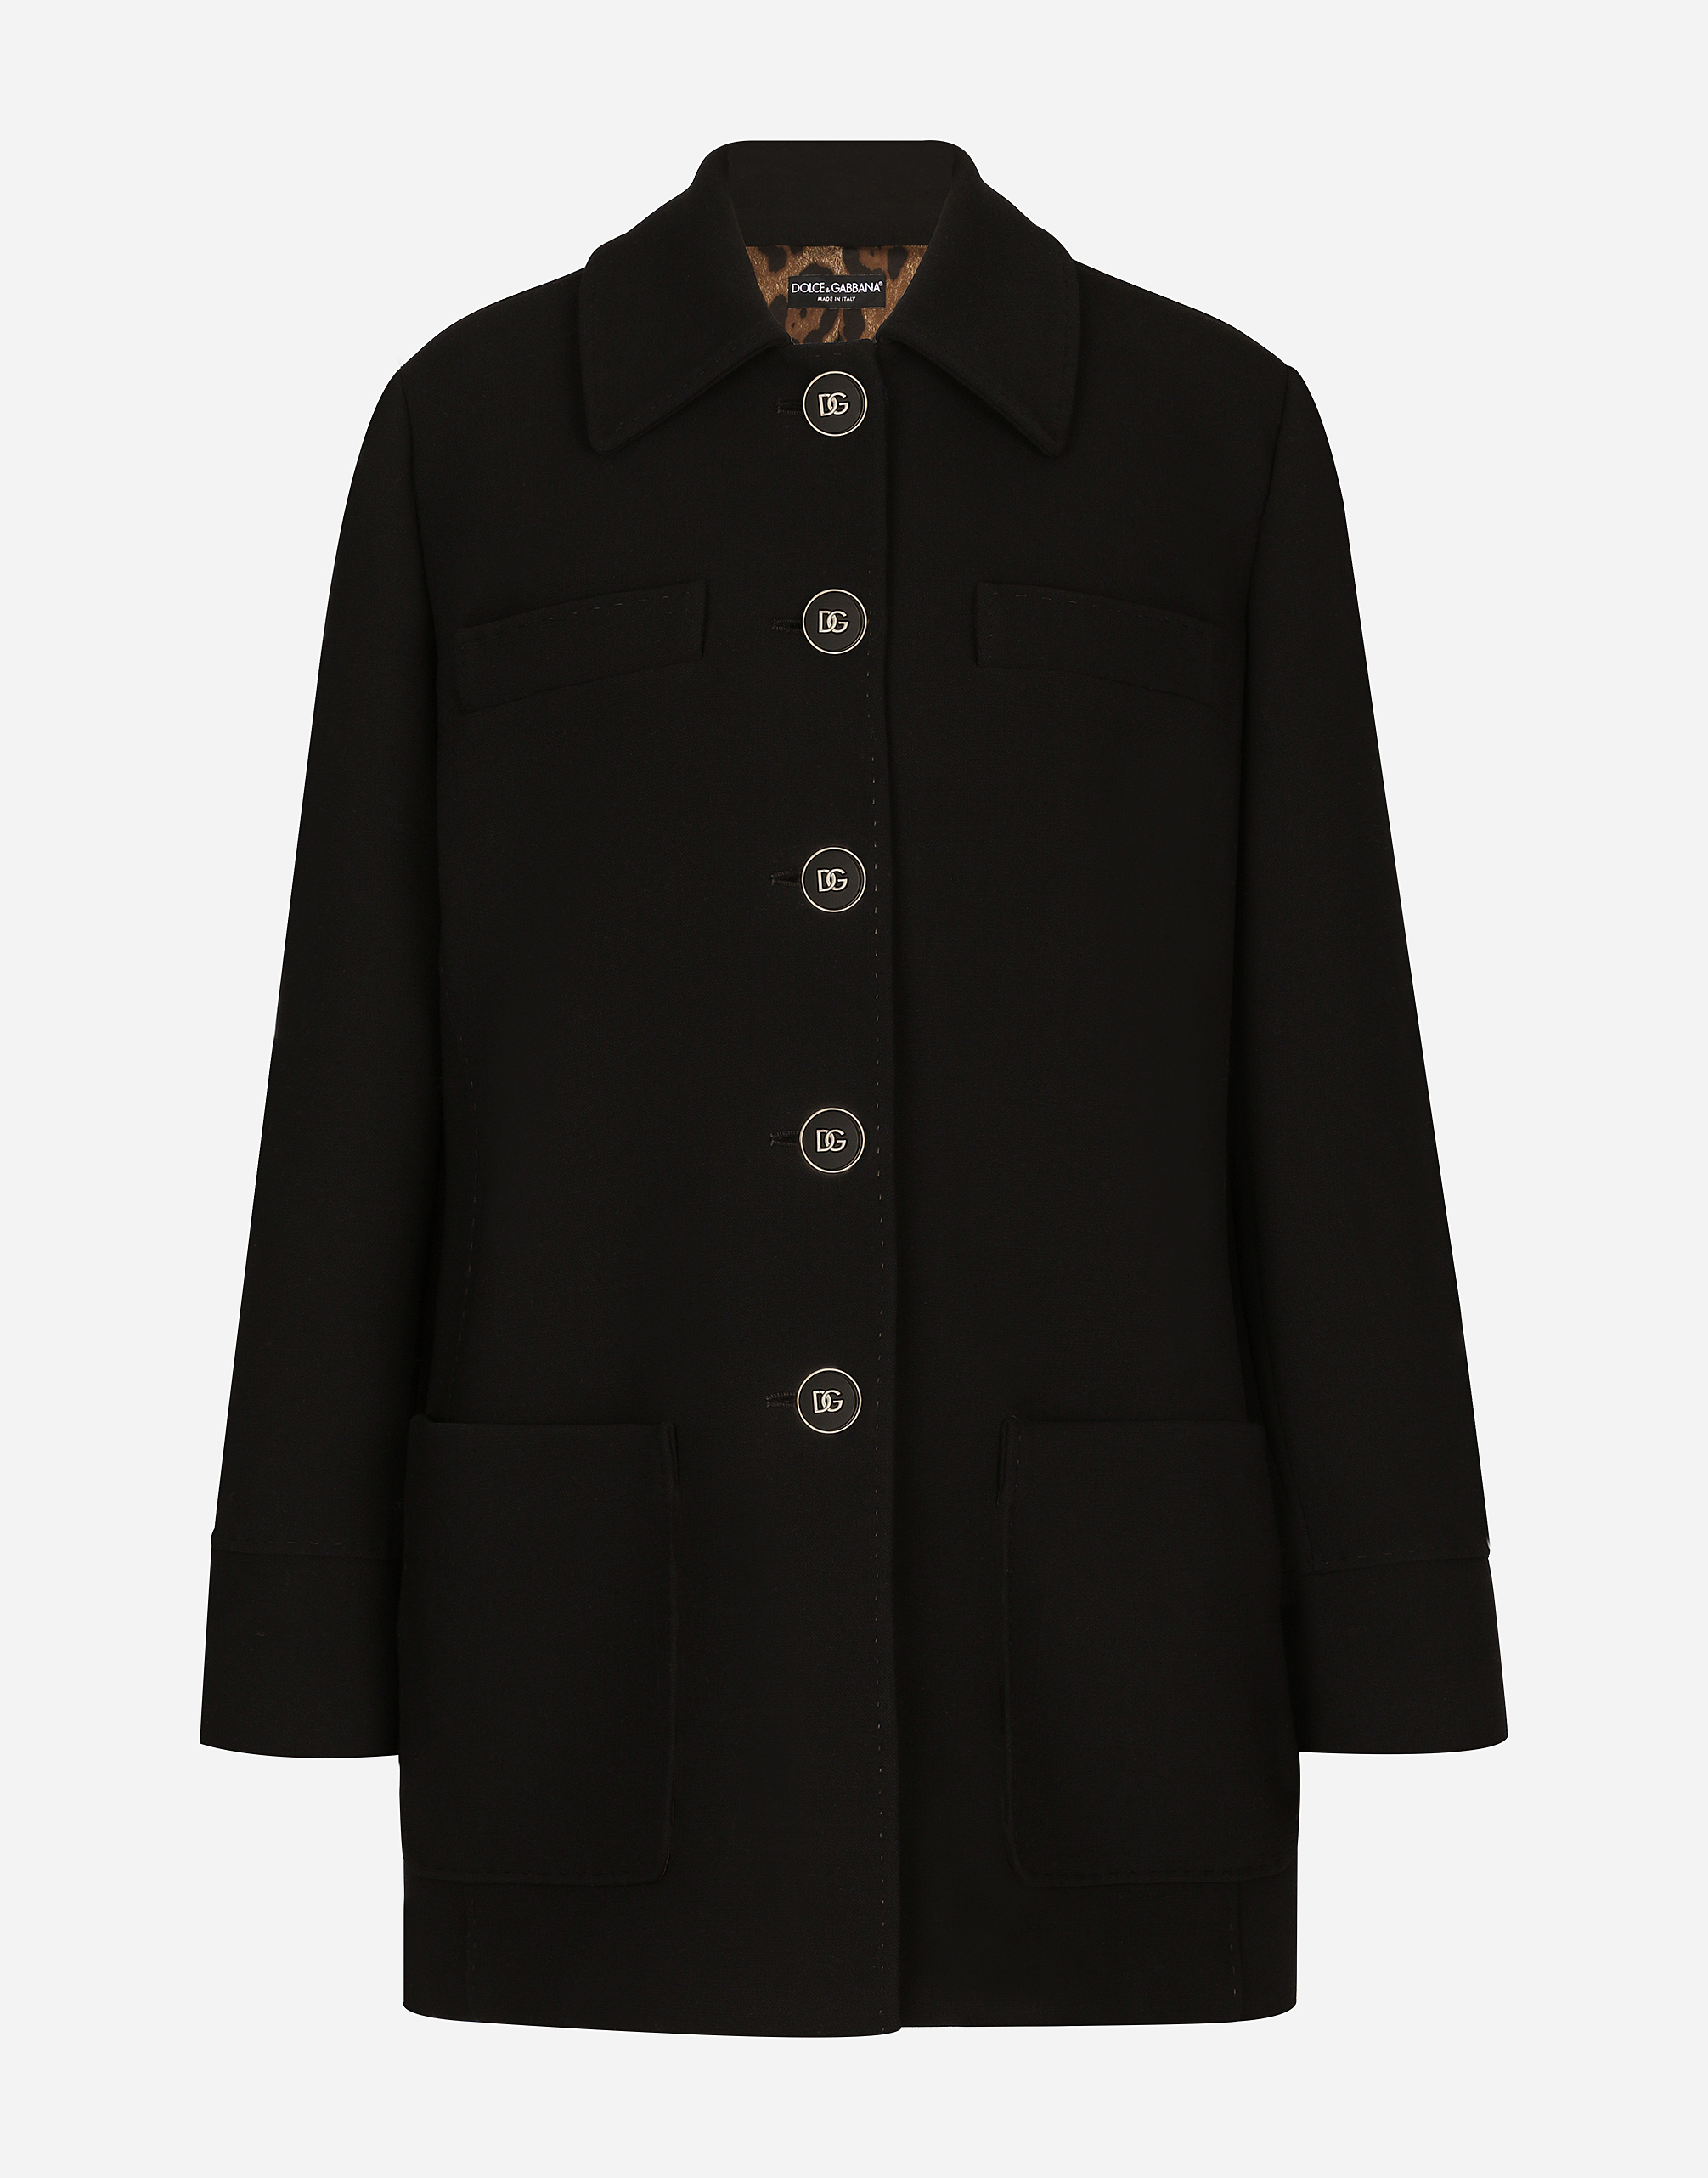 Dolce & Gabbana Double Crepe Peacoat With Galalith Buttons In Black